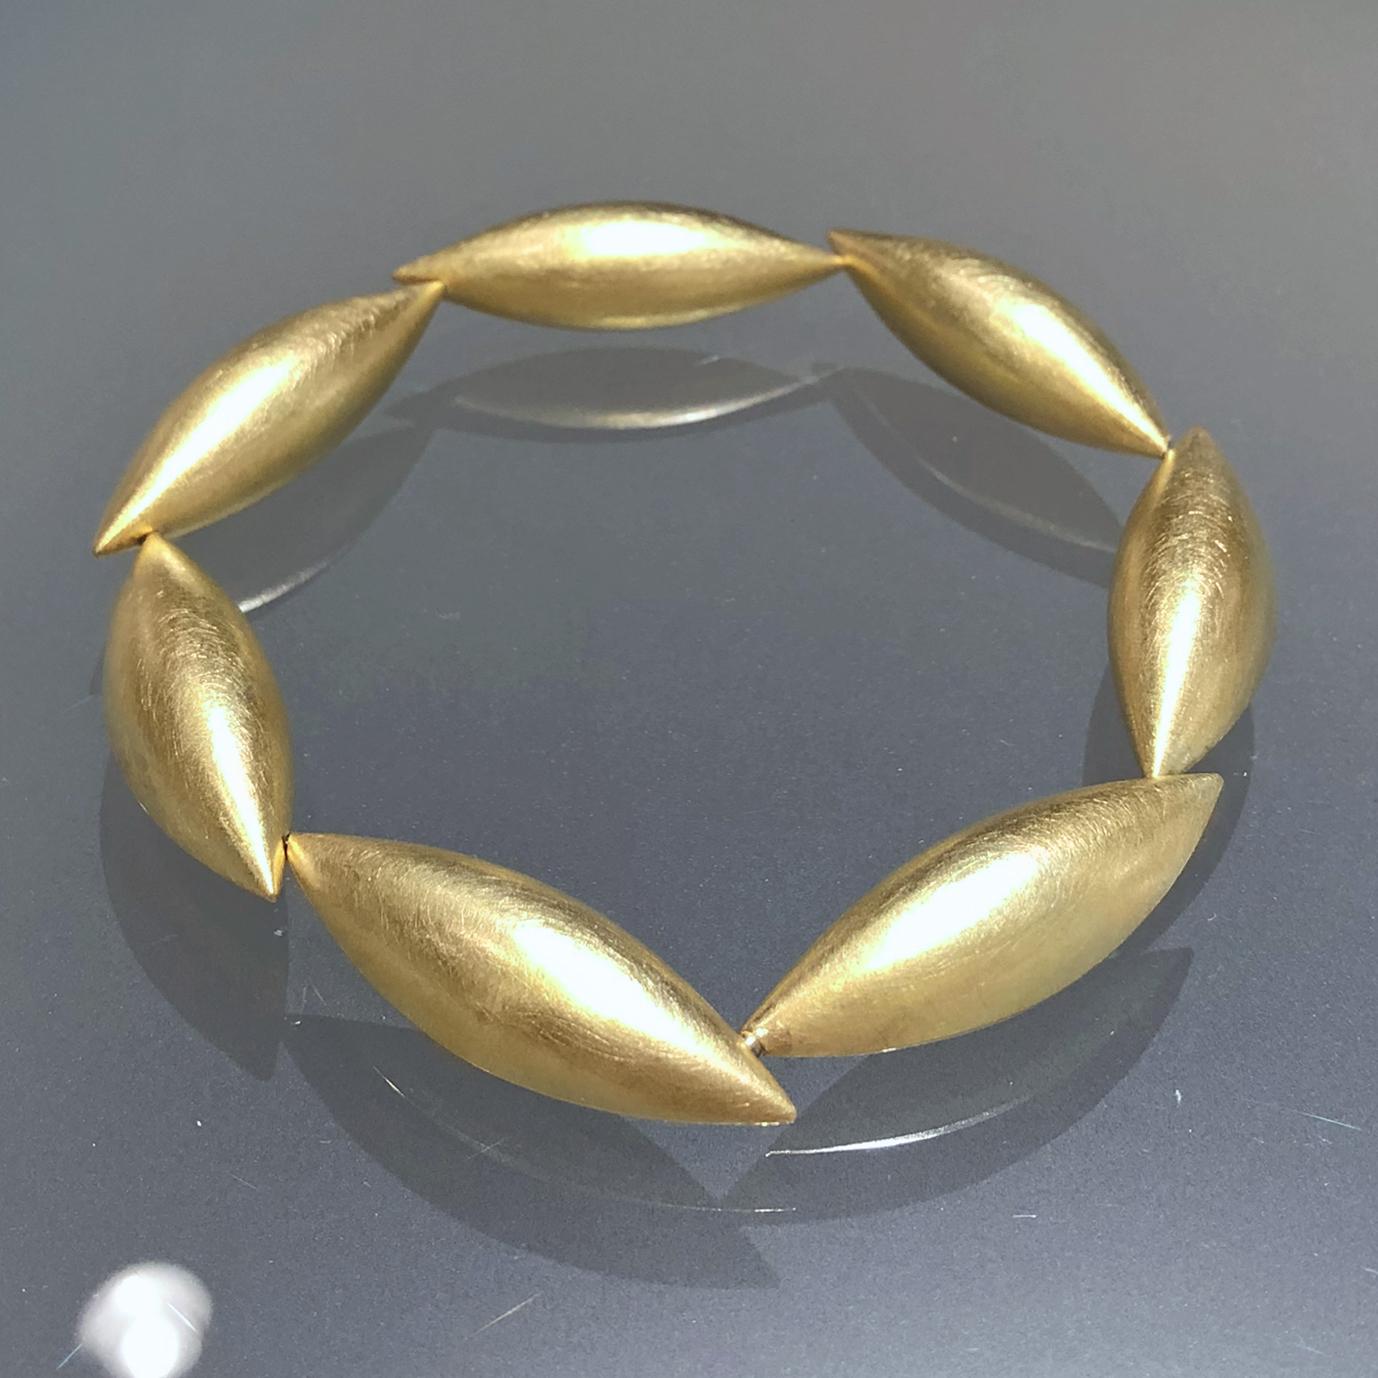 Cocoon Bracelet handcrafted in Germany by acclaimed master metalsmith and jewelry maker Erich Zimmermann in signature-finished 18k yellow gold with a hidden slide clasp. Our best-seller for nearly two decades, Erich's Cocoon collection is elegant,